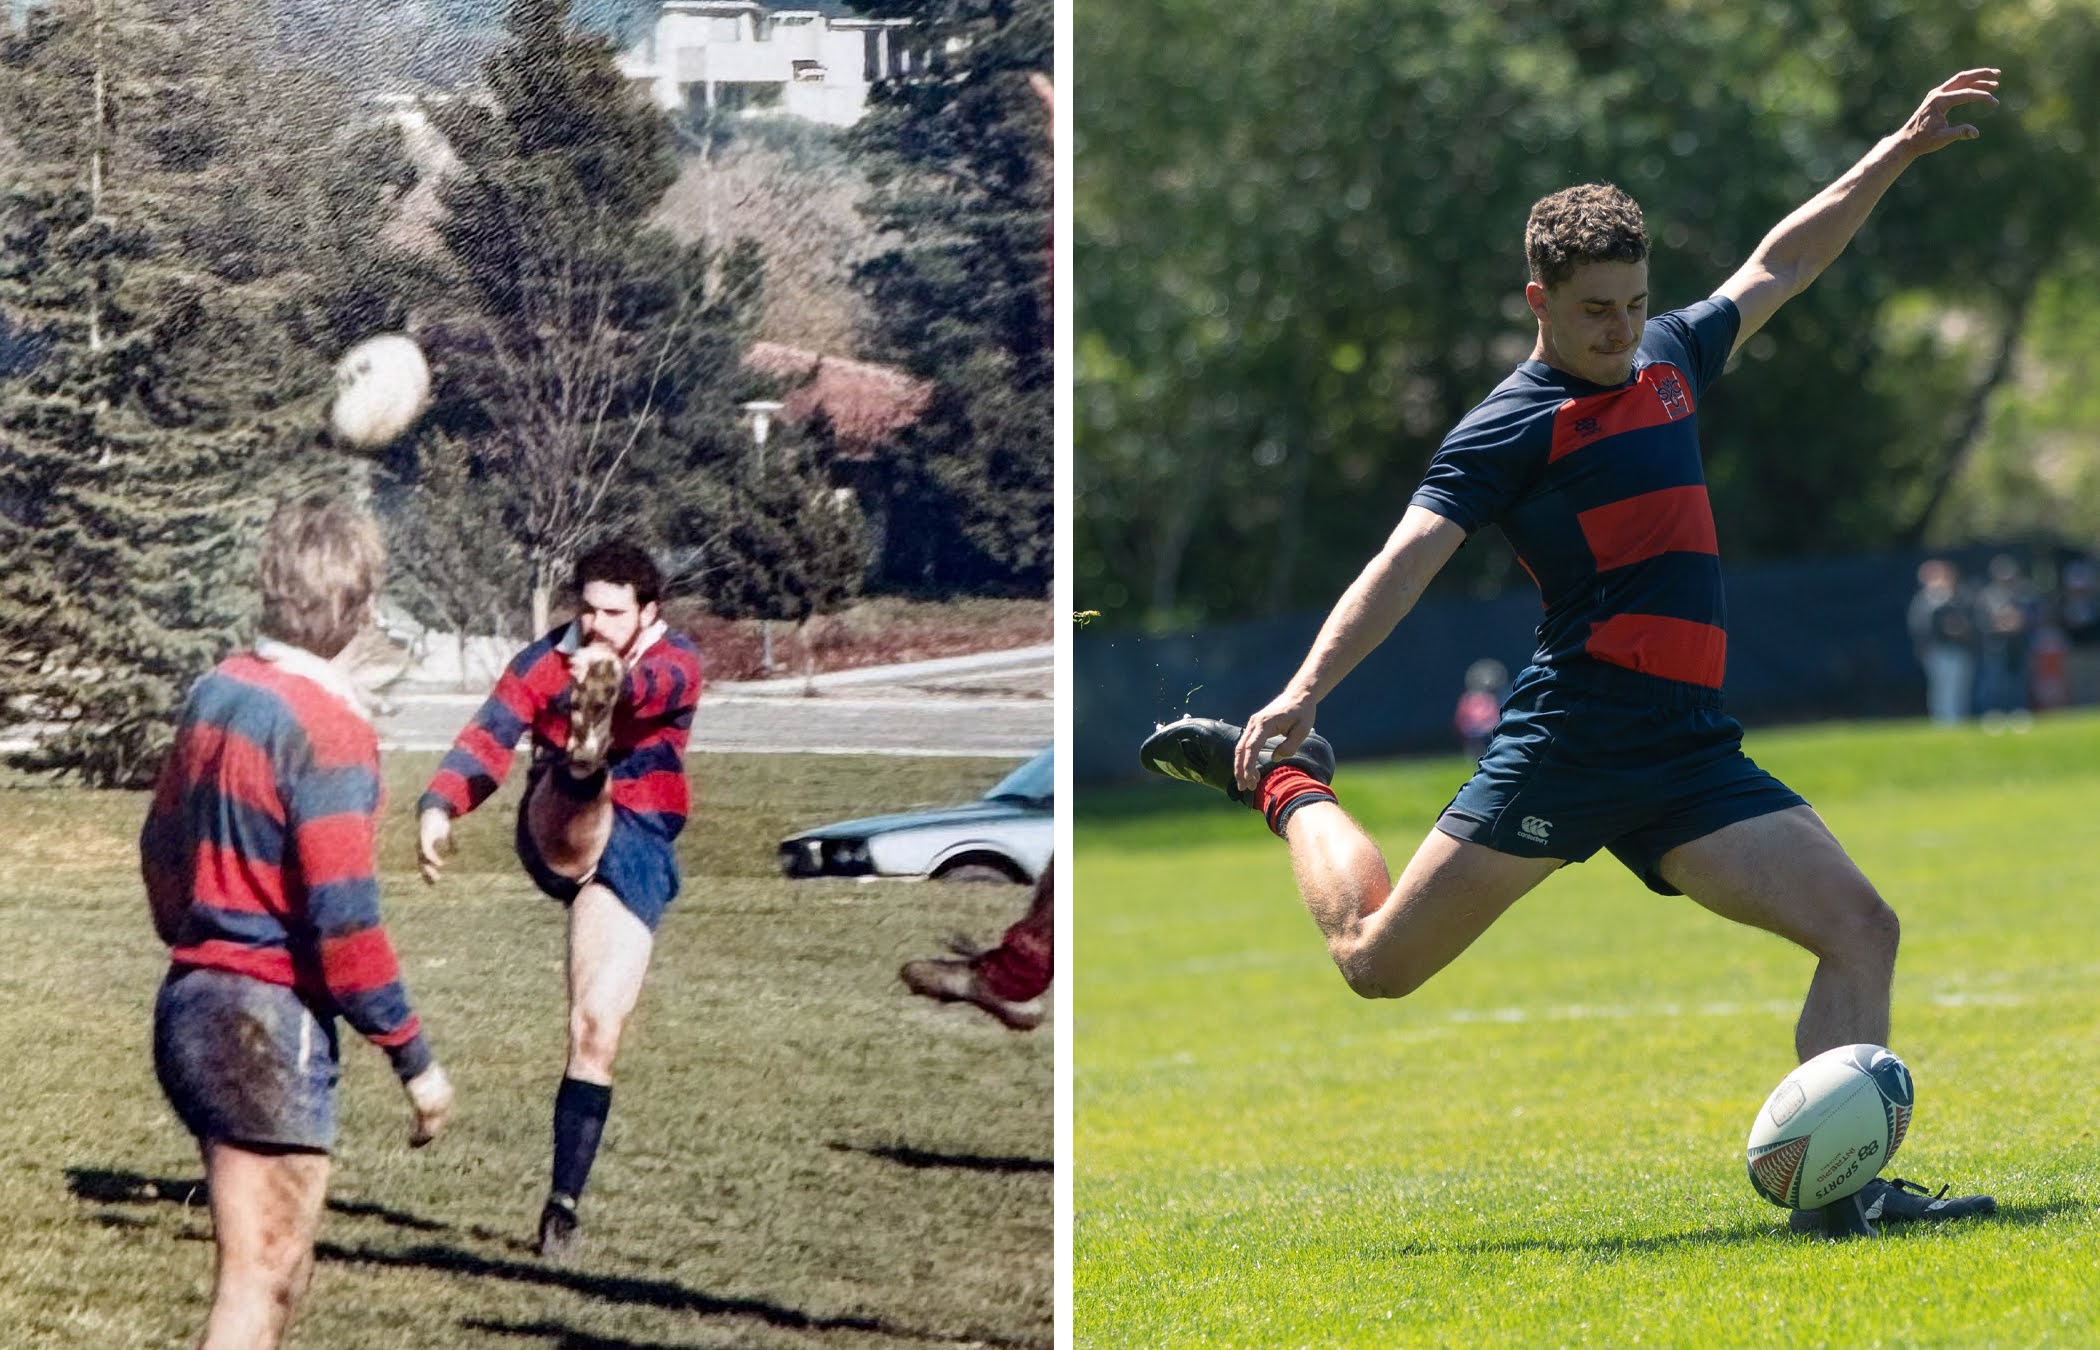 Up and Under: Marty Storti ‘85 MA ‘89 pictured on the left kicks to clear the defense from Gael territory.  Mario Storti ‘25 kicks for conversation points. / Photos provided courtesy of Storti Family & Club Sports